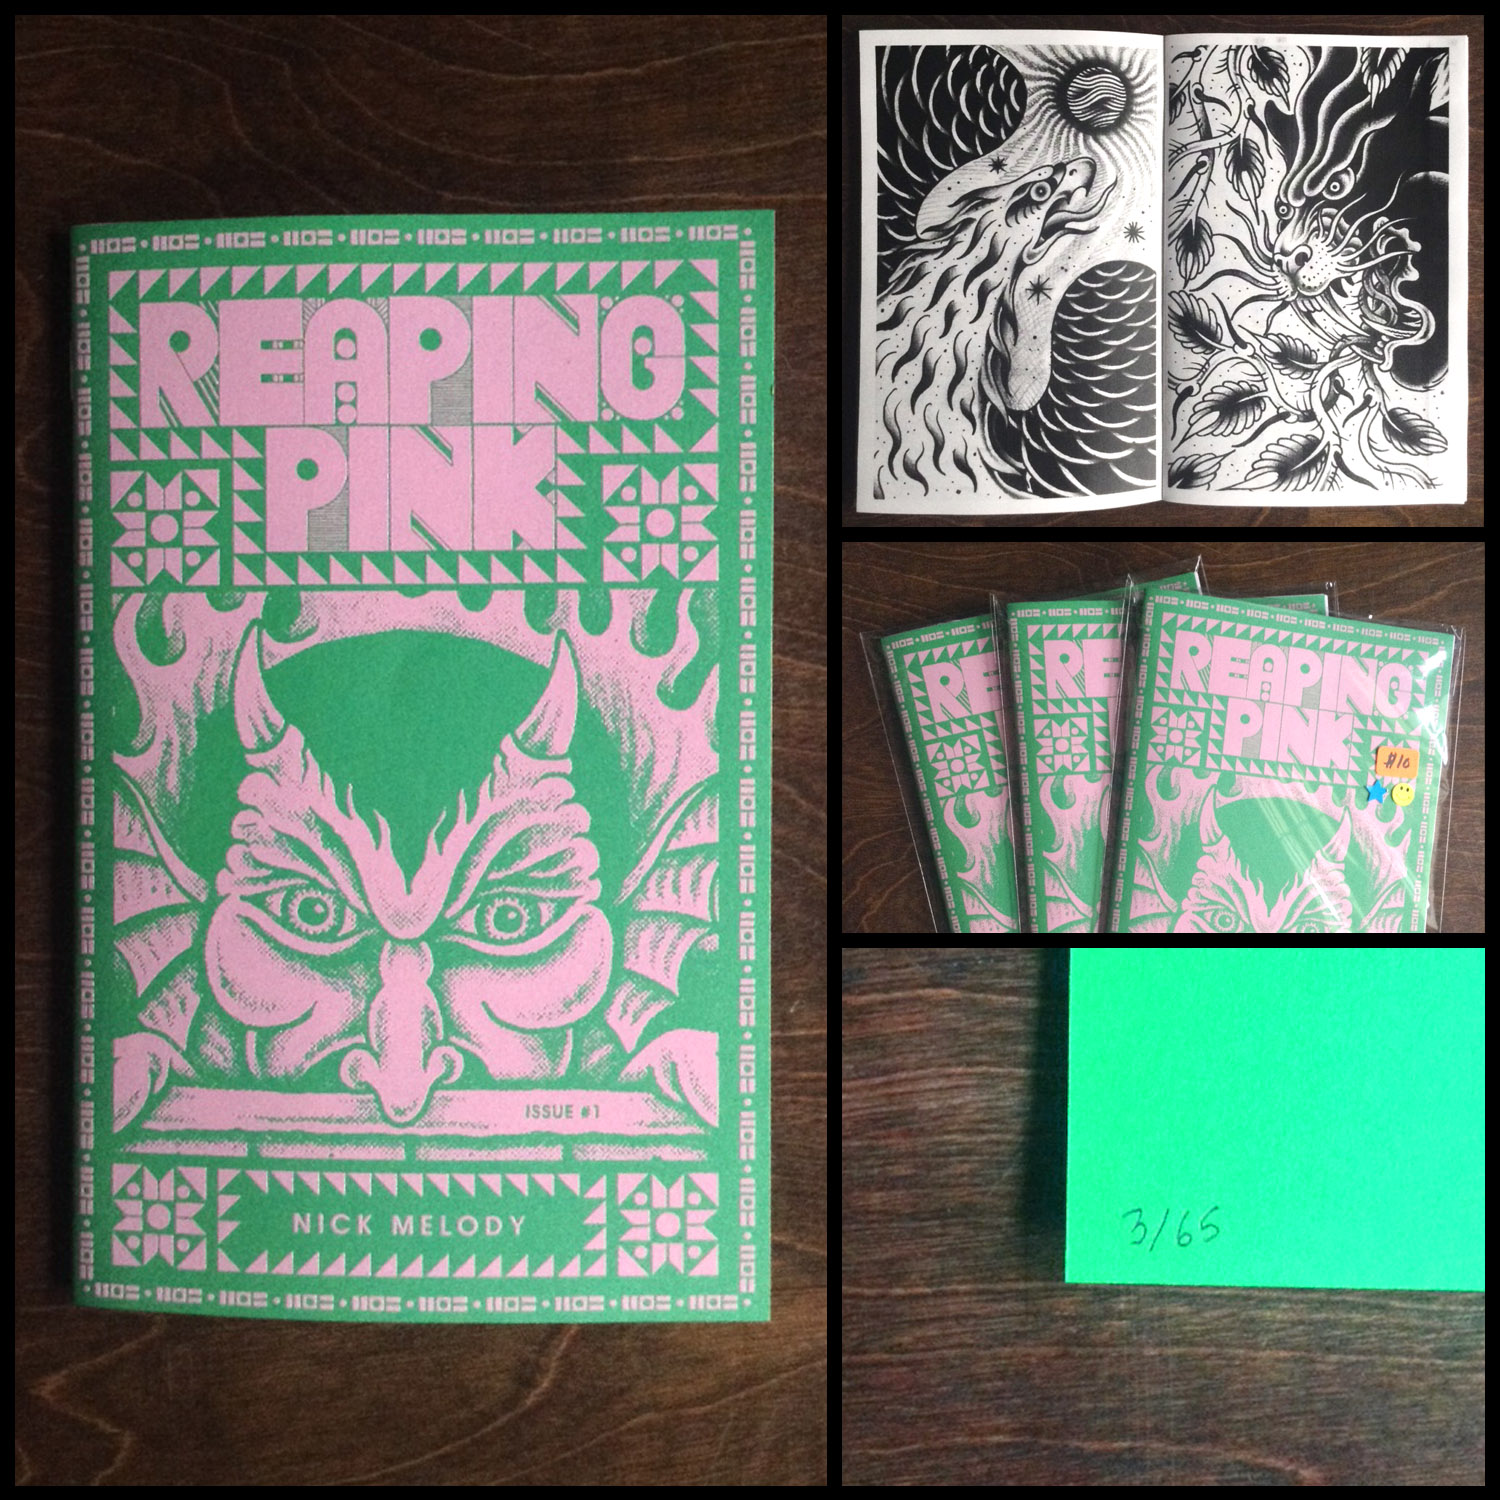 Nick Melody's "Reaping Pink" zine.